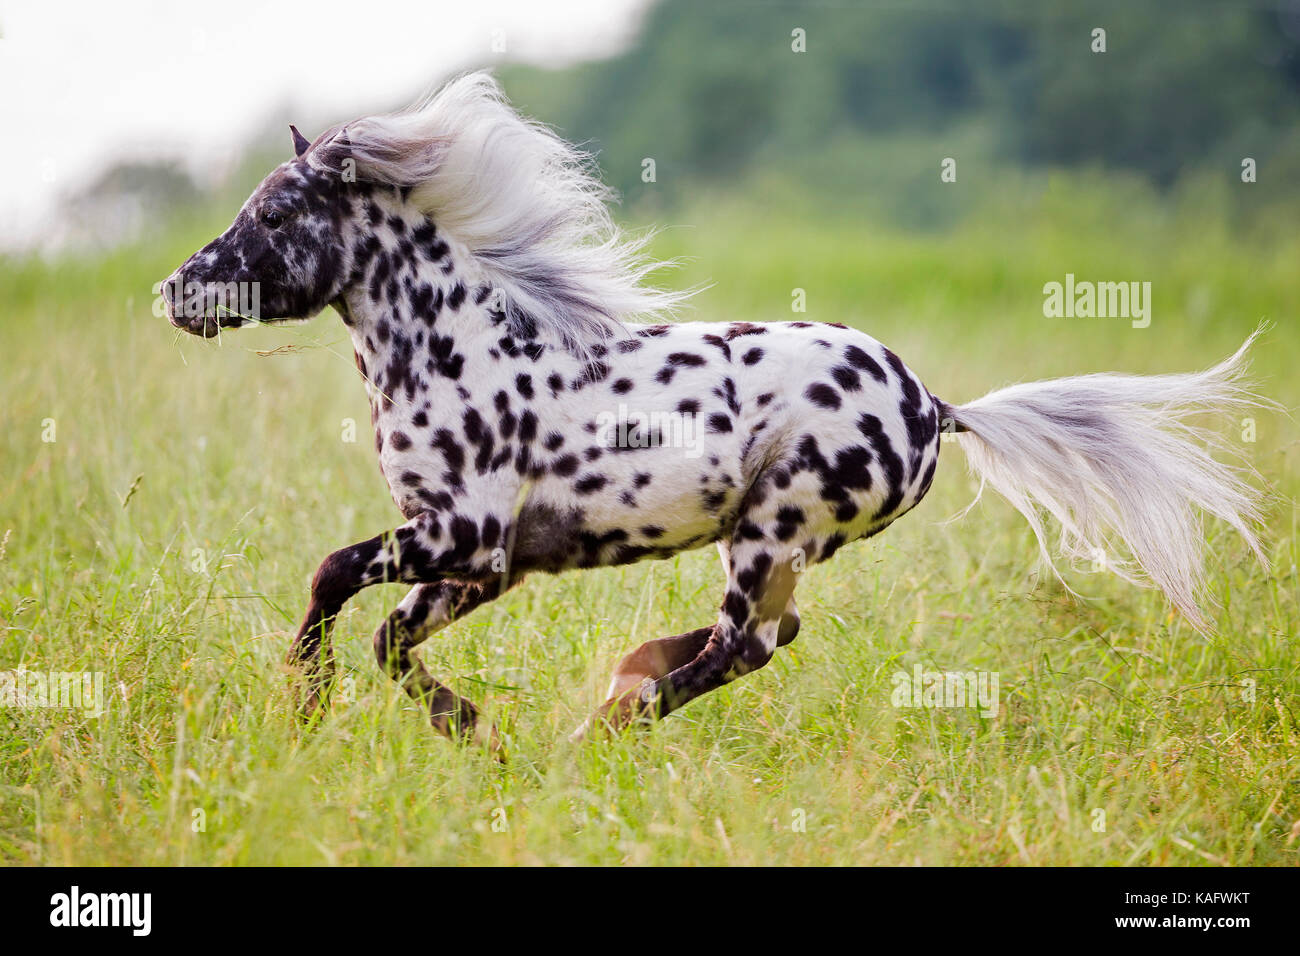 Falabella Miniature Horse. Leopard-spotted stallion galloping on a meadow. Austria Stock Photo